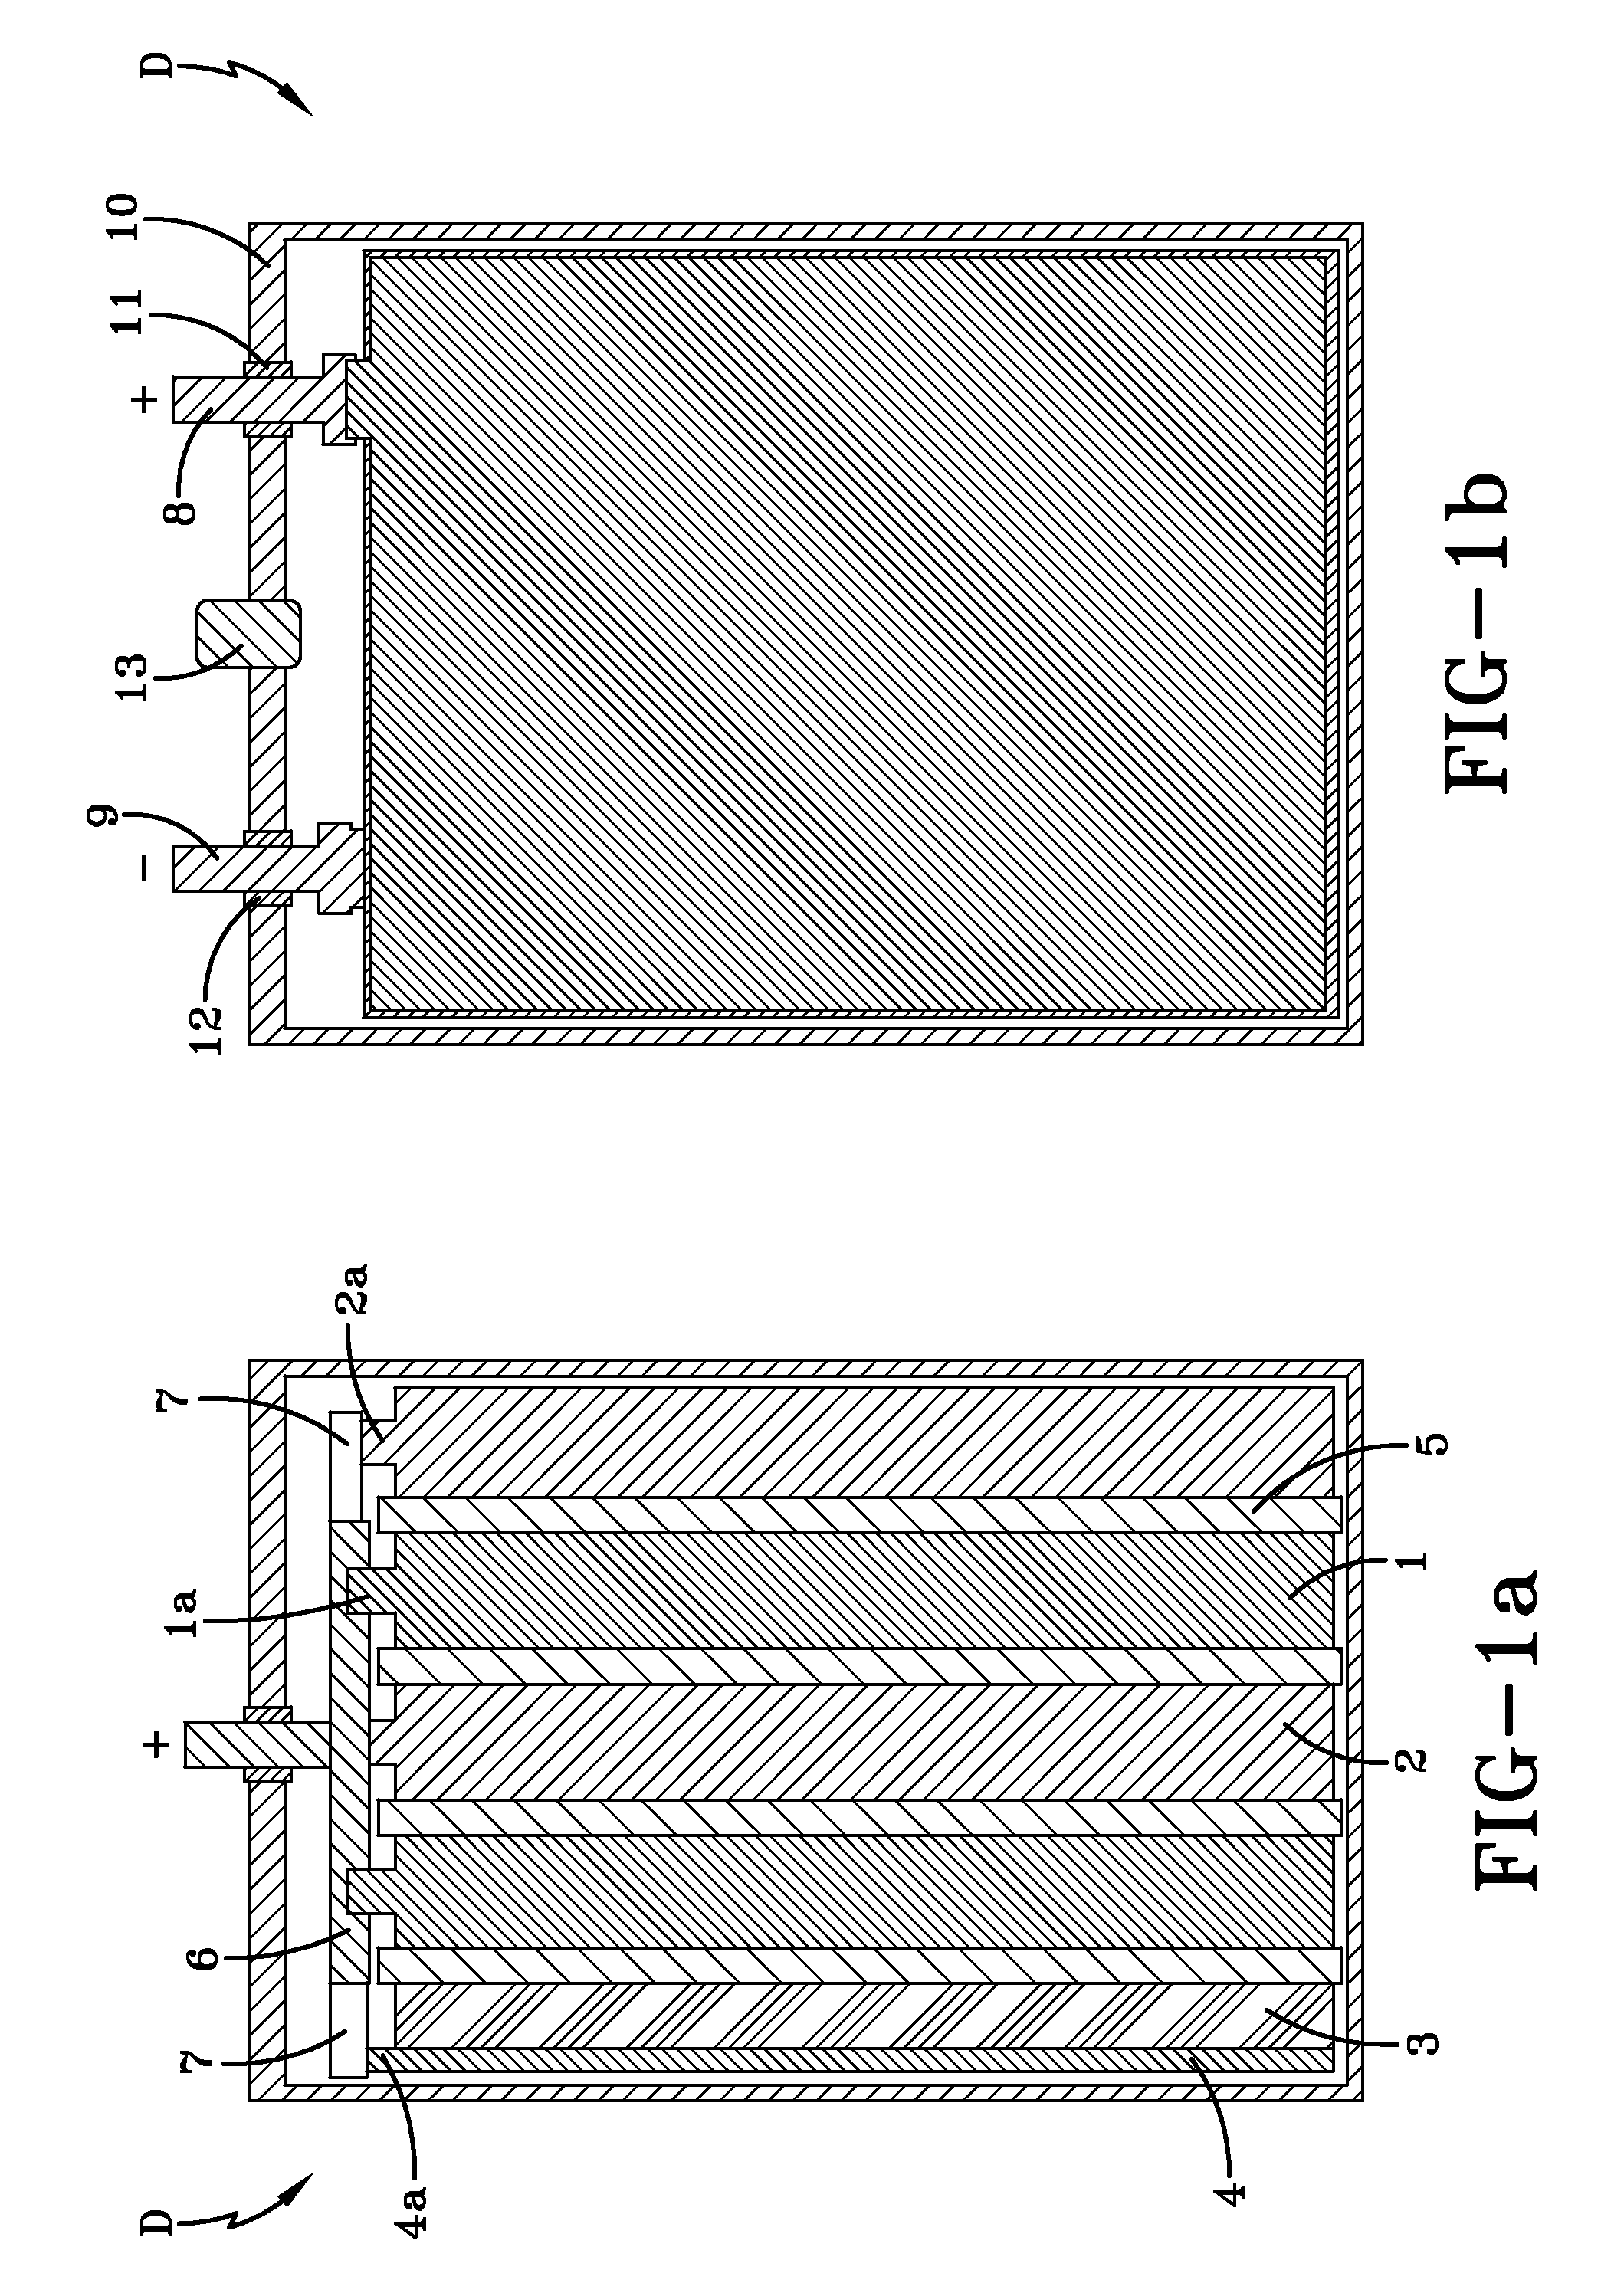 Electrochemical supercapacitor/lead-acid battery hybrid electrical energy storage device